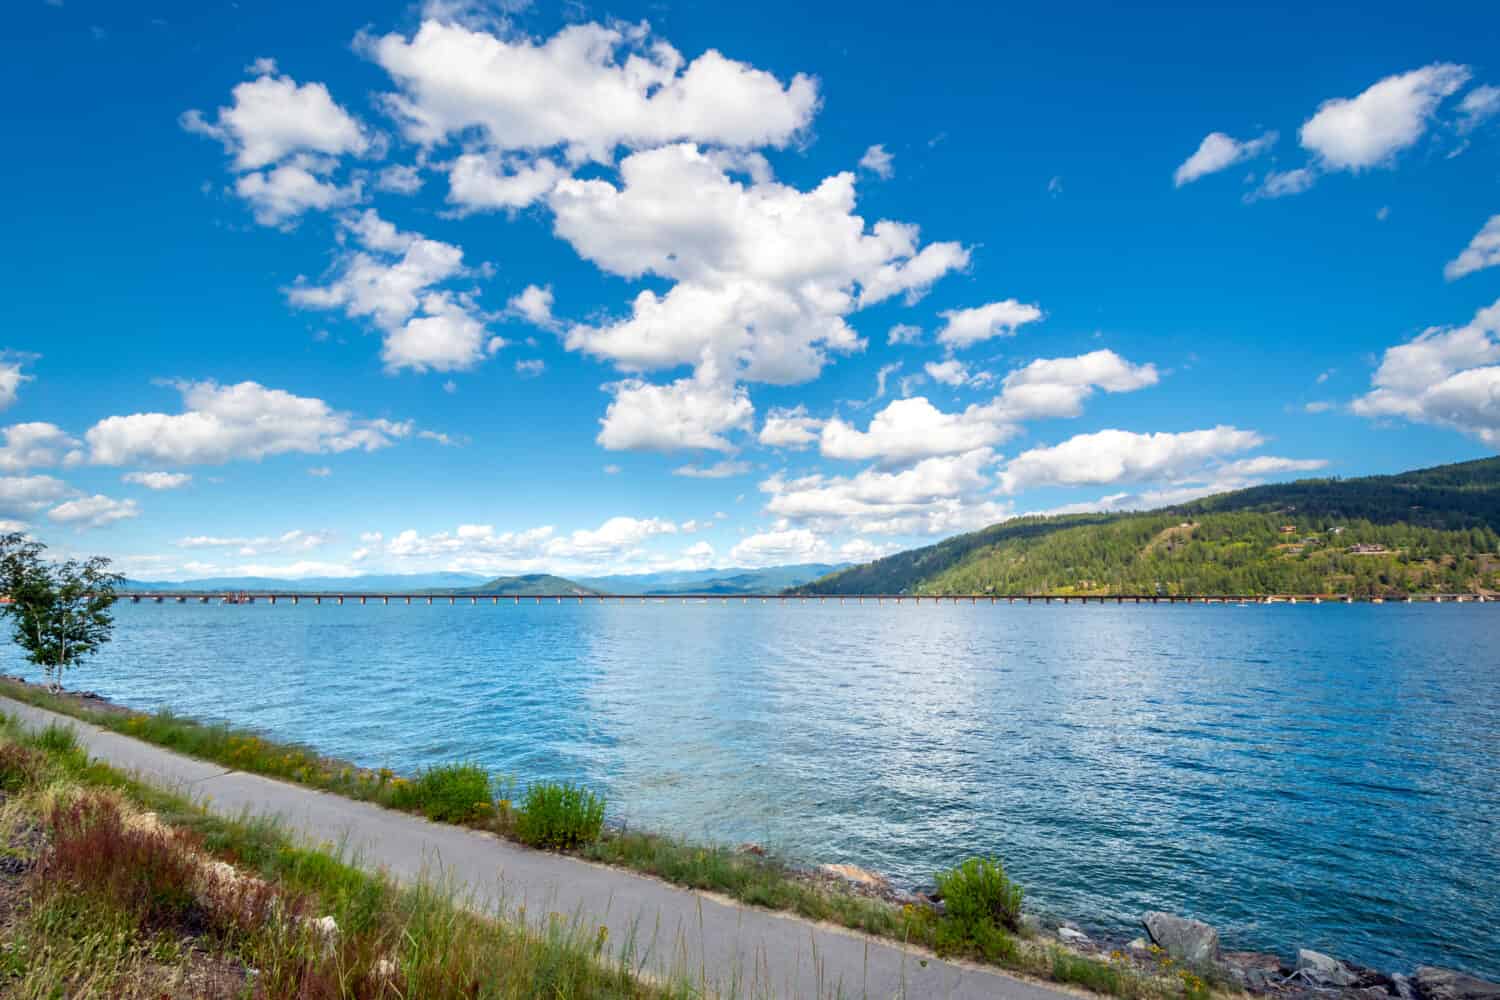 View of Lake Pend Oreille and the mountains of Sandpoint North Idaho, USA, from the Sandpoint Bay Long Bridge on a beautiful summer afternoon